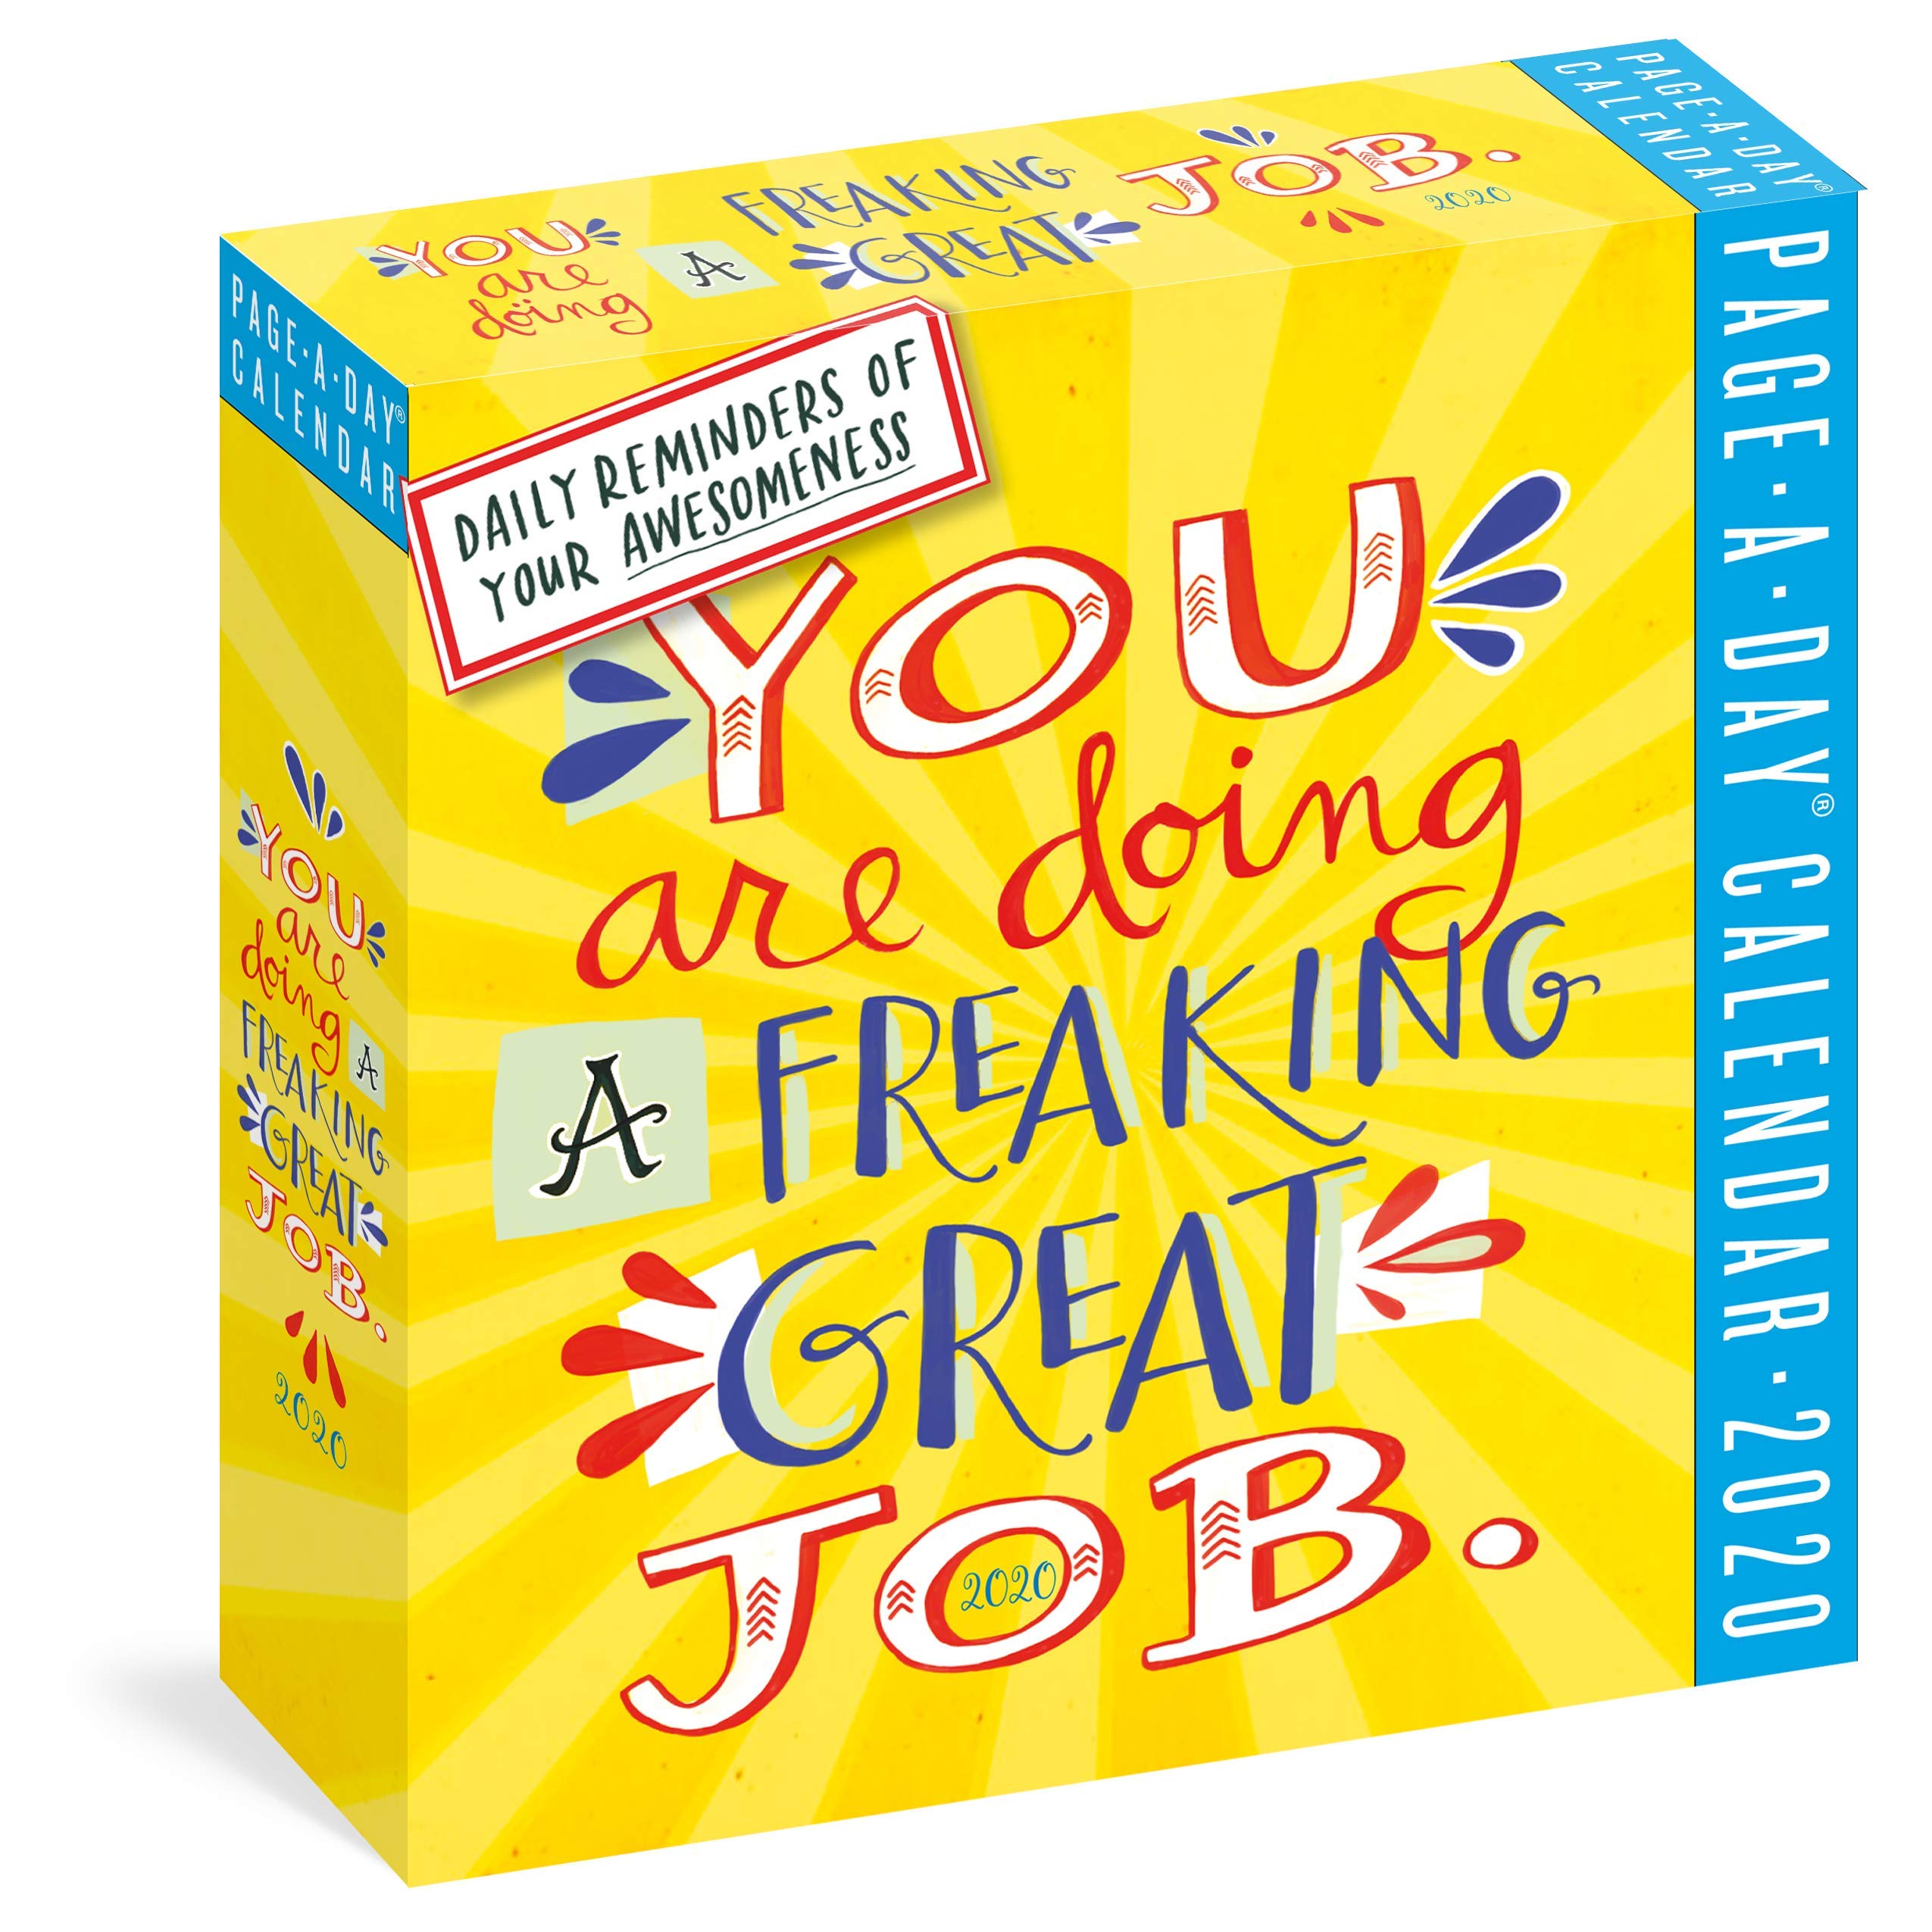 Calendar 2020 - Page-A-Day - You Are Doing A Freaking Great Job | Workman Publishing